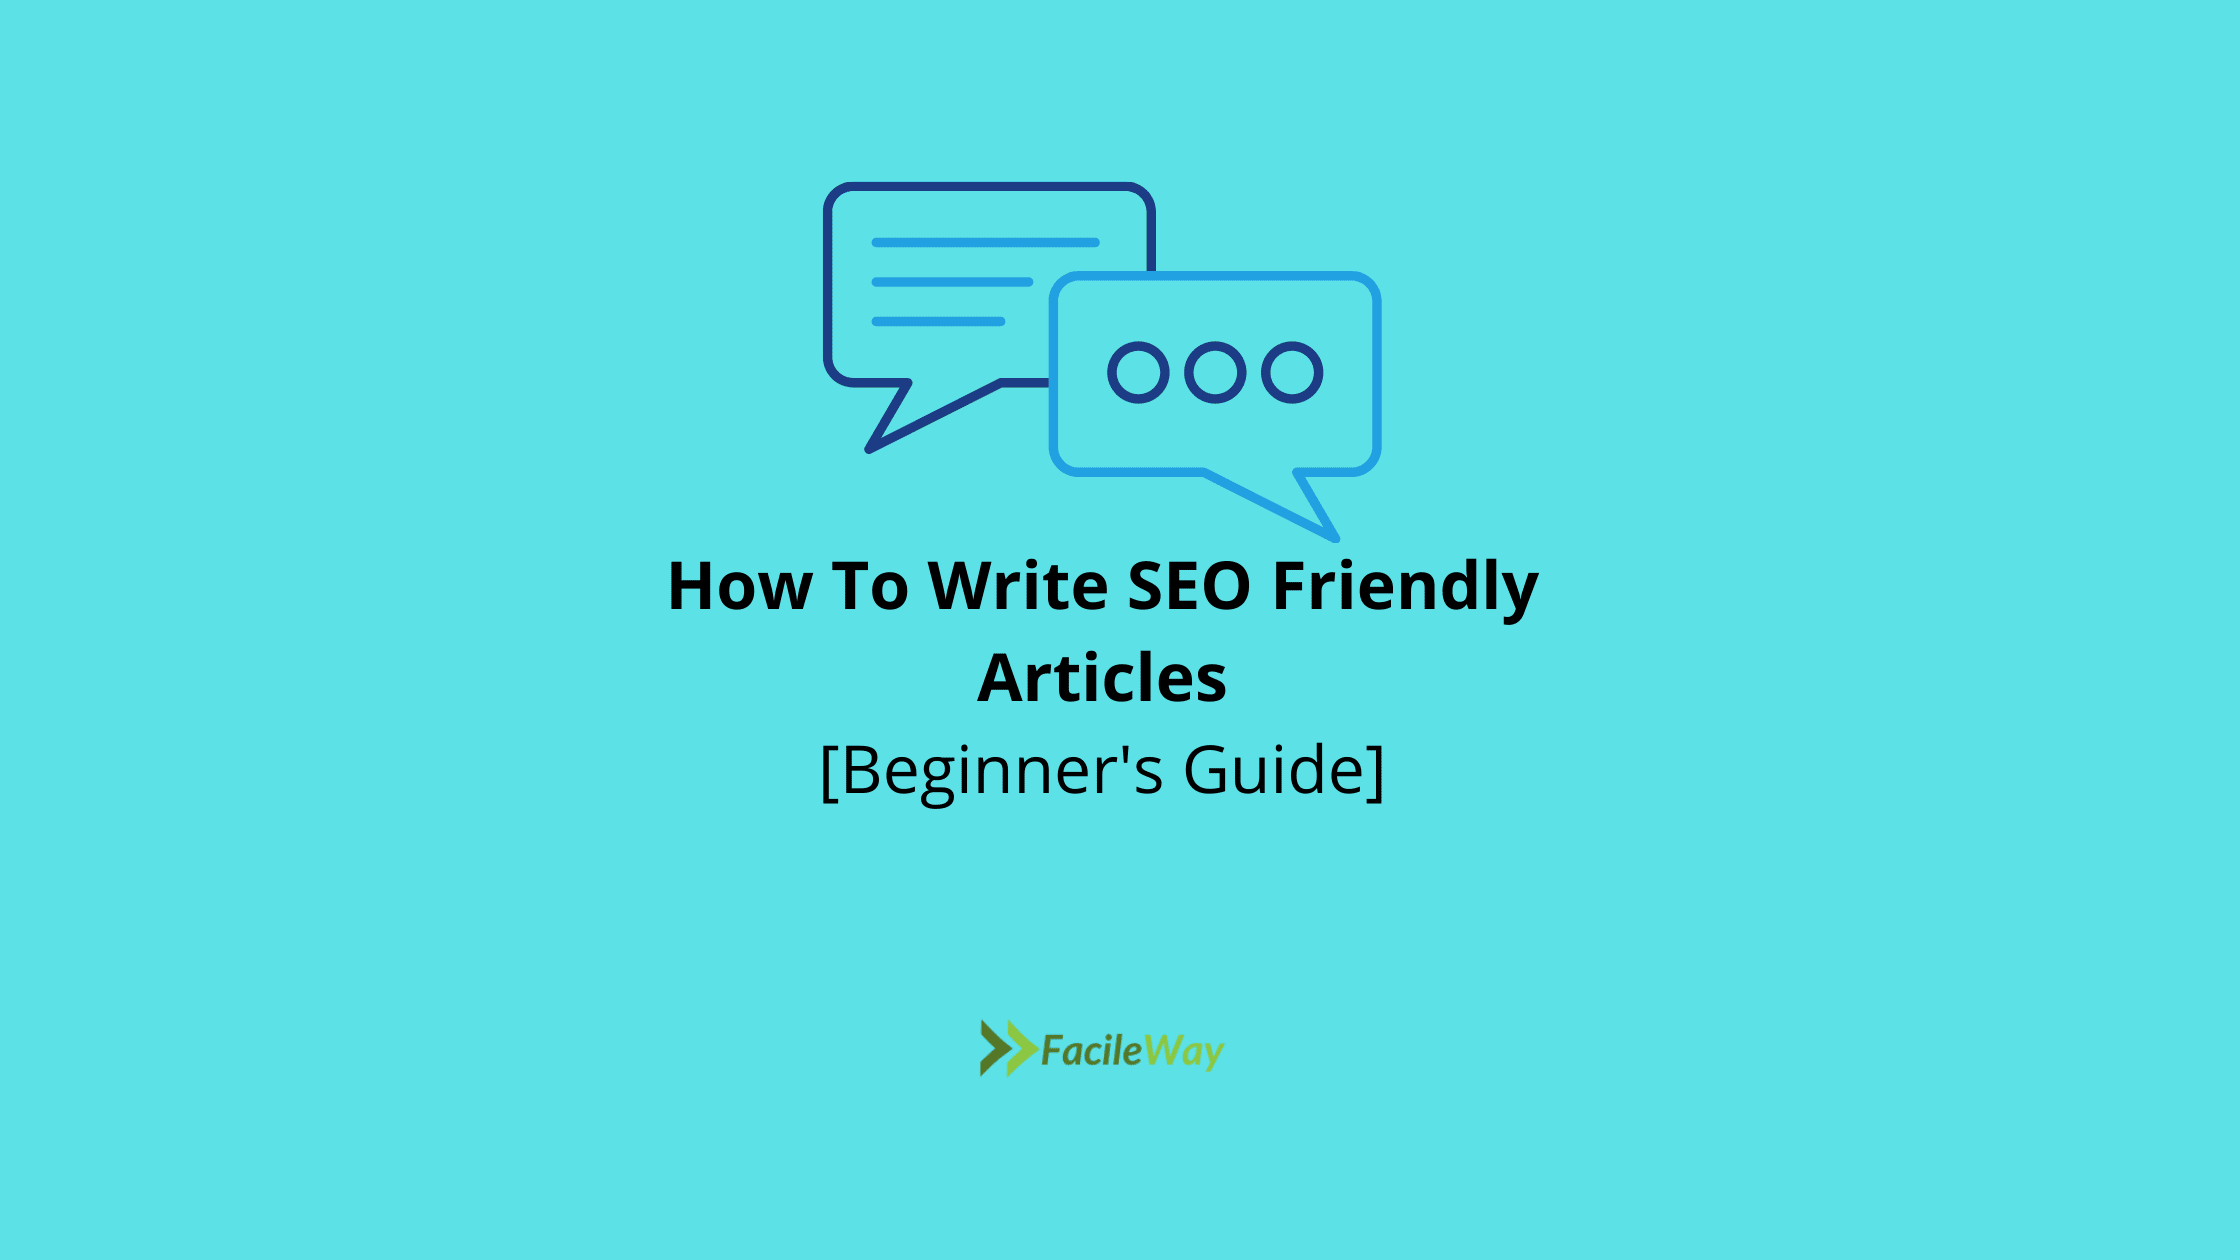 How To Write SEO Friendly Articles In 2022 [Beginner’s Guide To Follow]